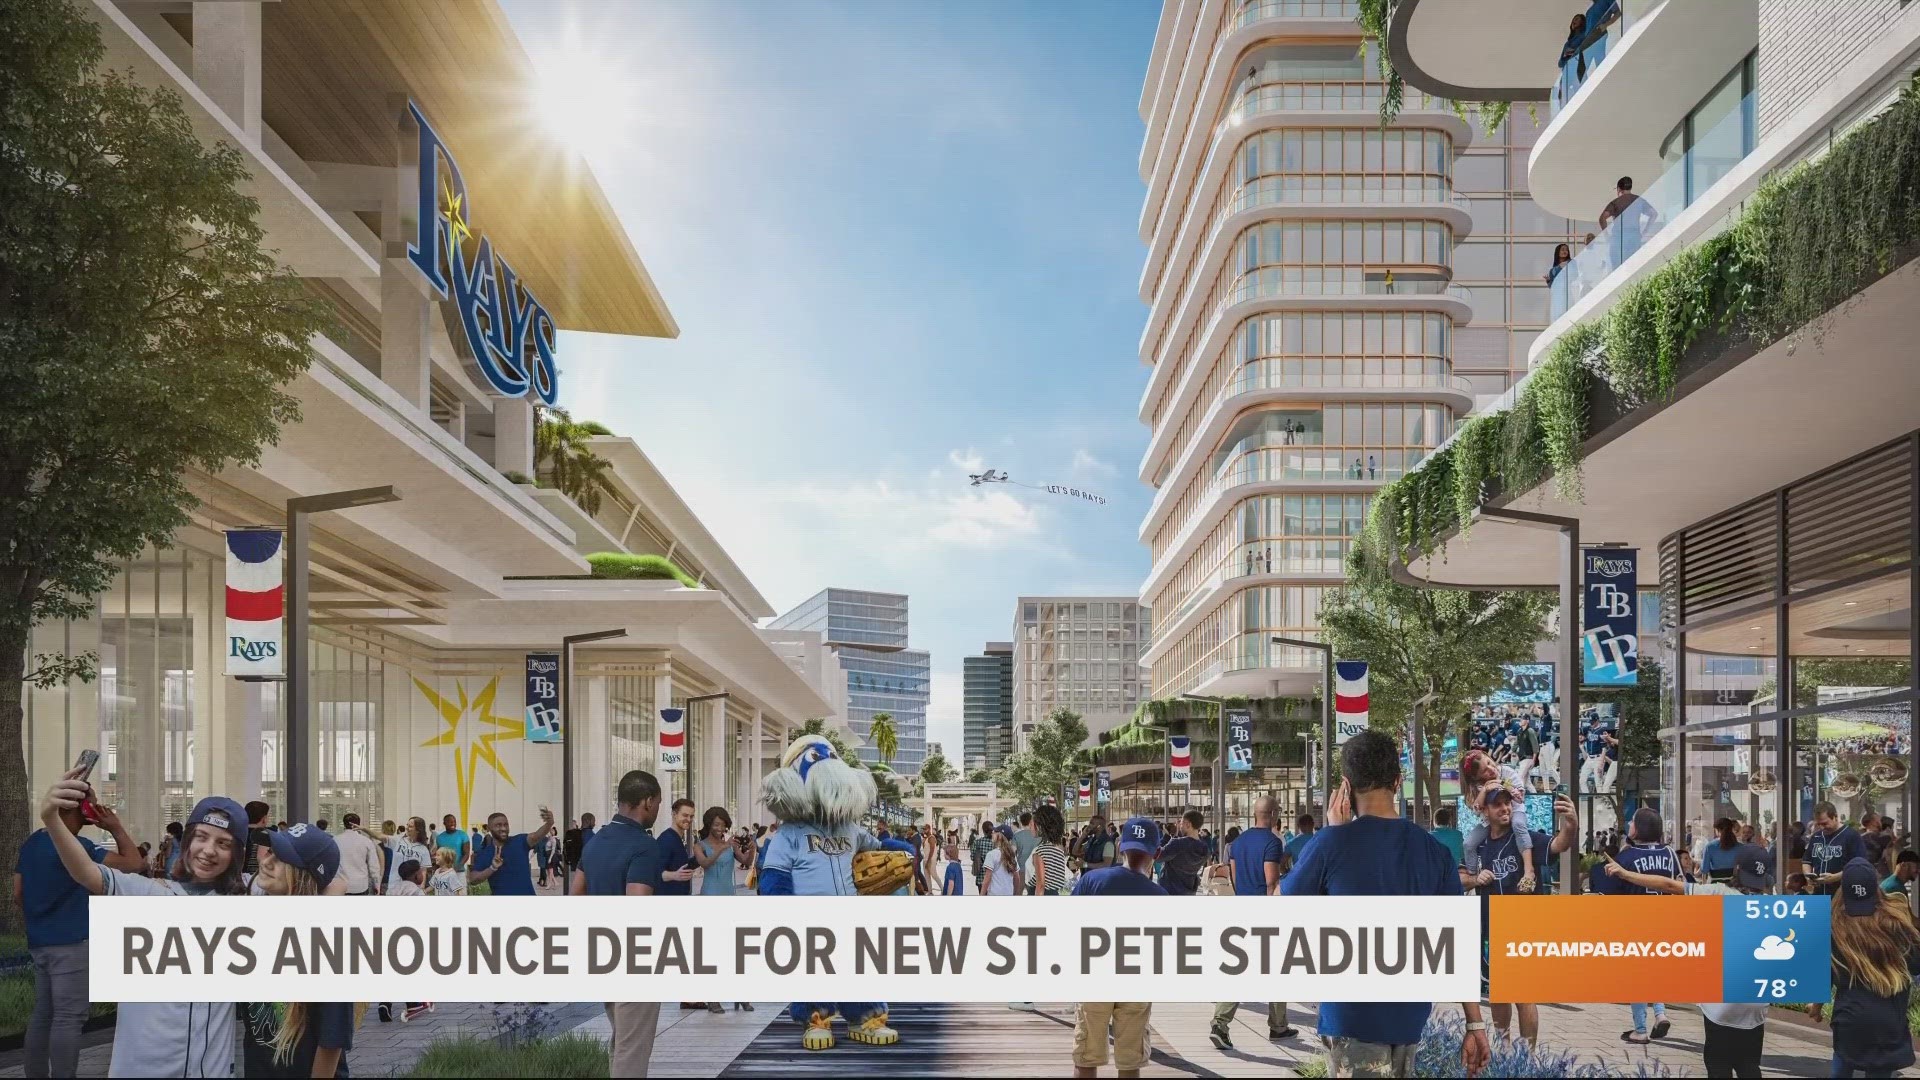 If approved, the deal would lead to the construction of a new stadium as well as commercial and residential developments.